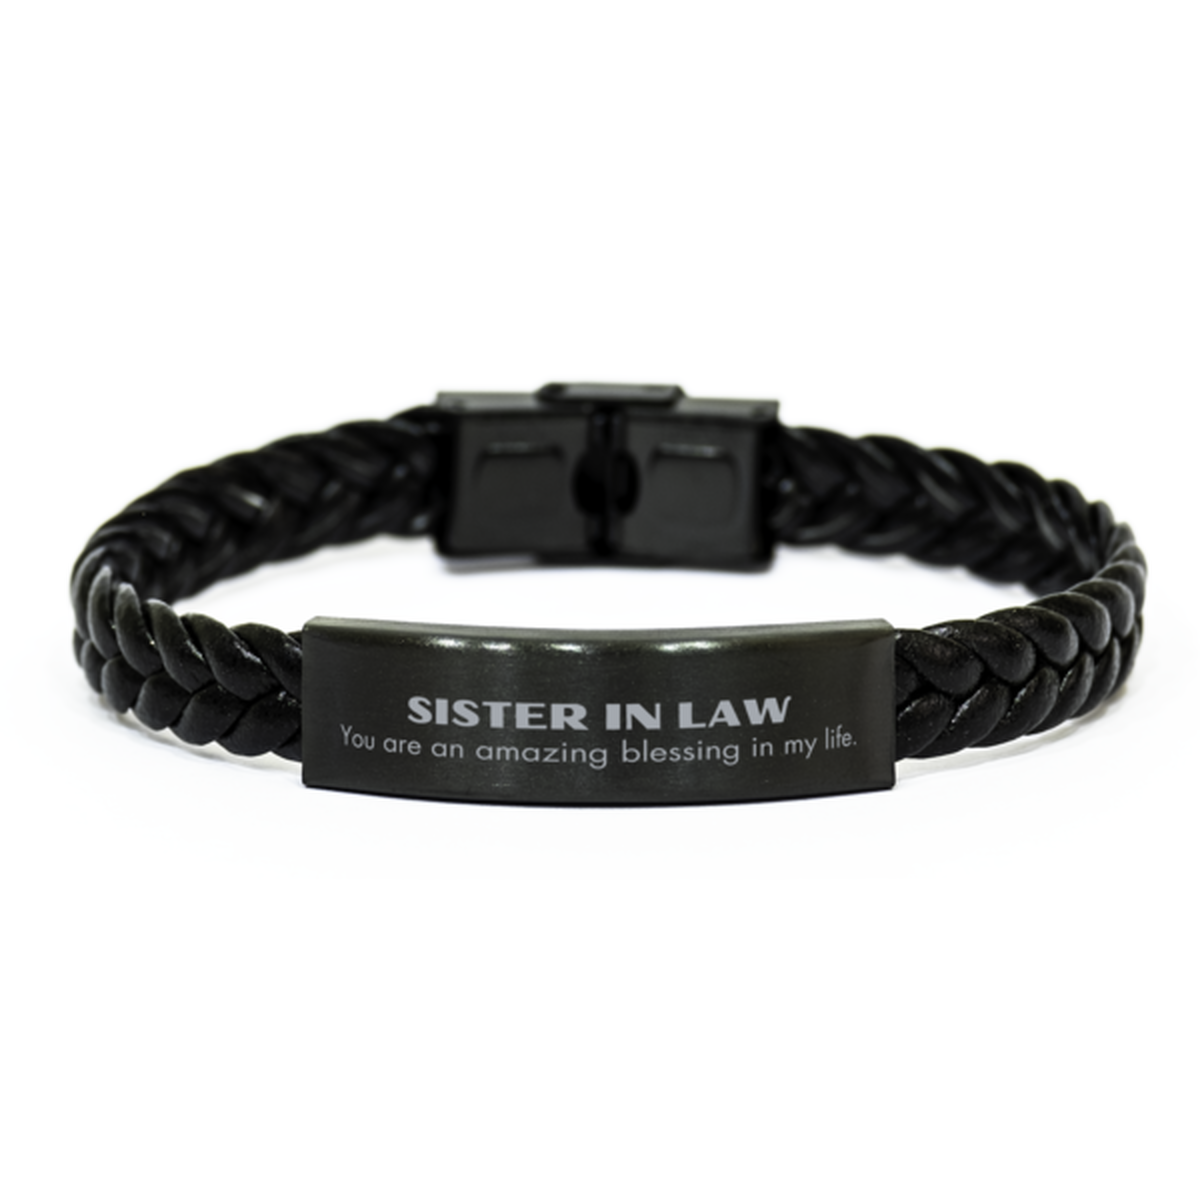 Sister In Law Braided Leather Bracelet, You are an amazing blessing in my life, Thank You Gifts For Sister In Law, Inspirational Birthday Christmas Unique Gifts For Sister In Law